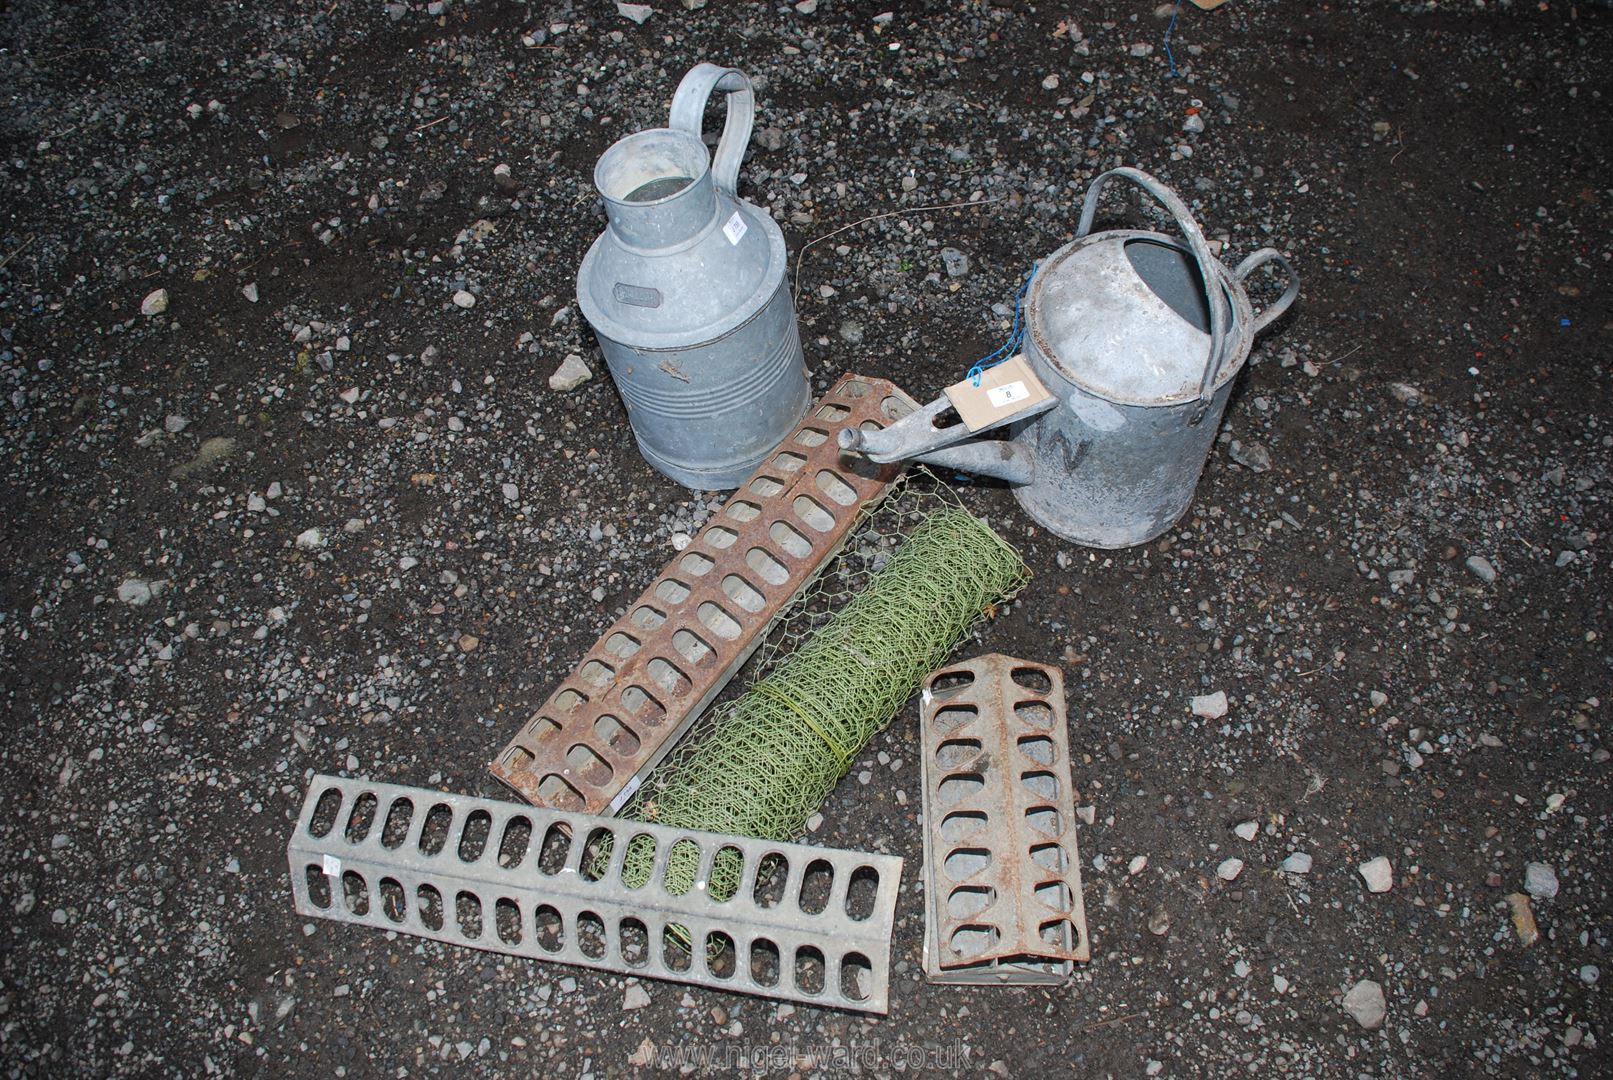 A quantity of chicken feeders, watering can, galvanised water carrier and wire.